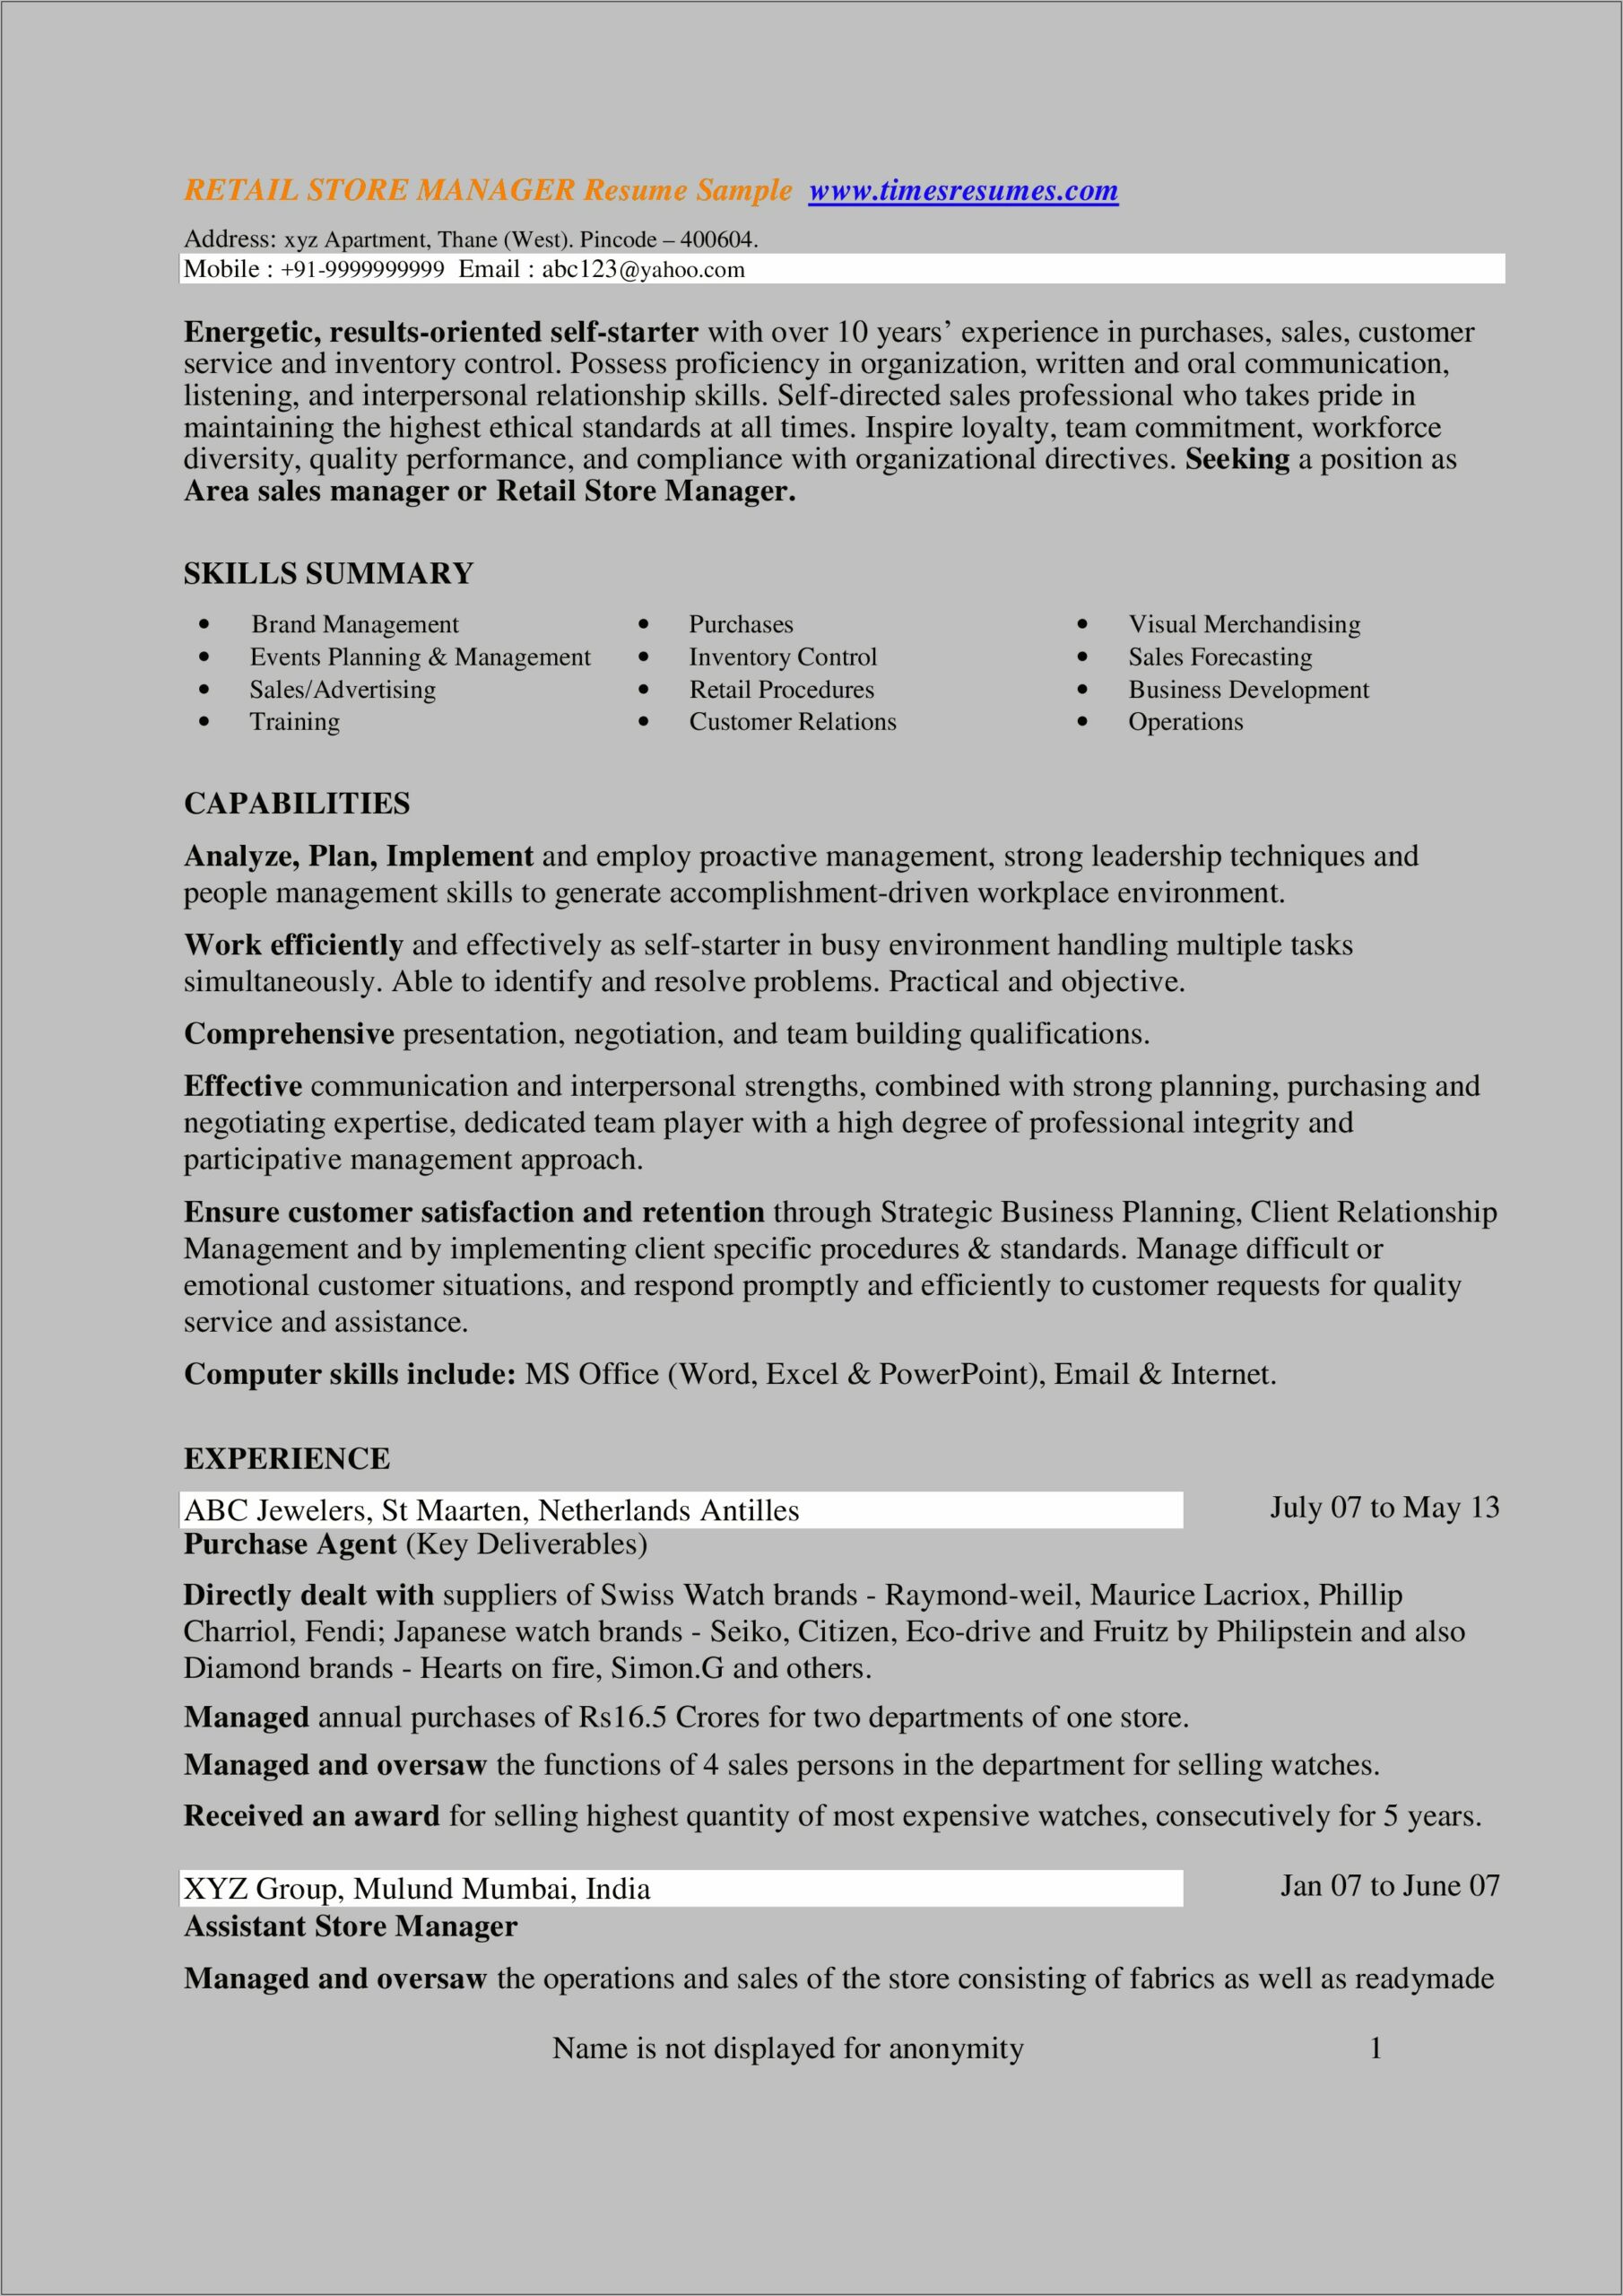 Free Download Sales Manager Resume